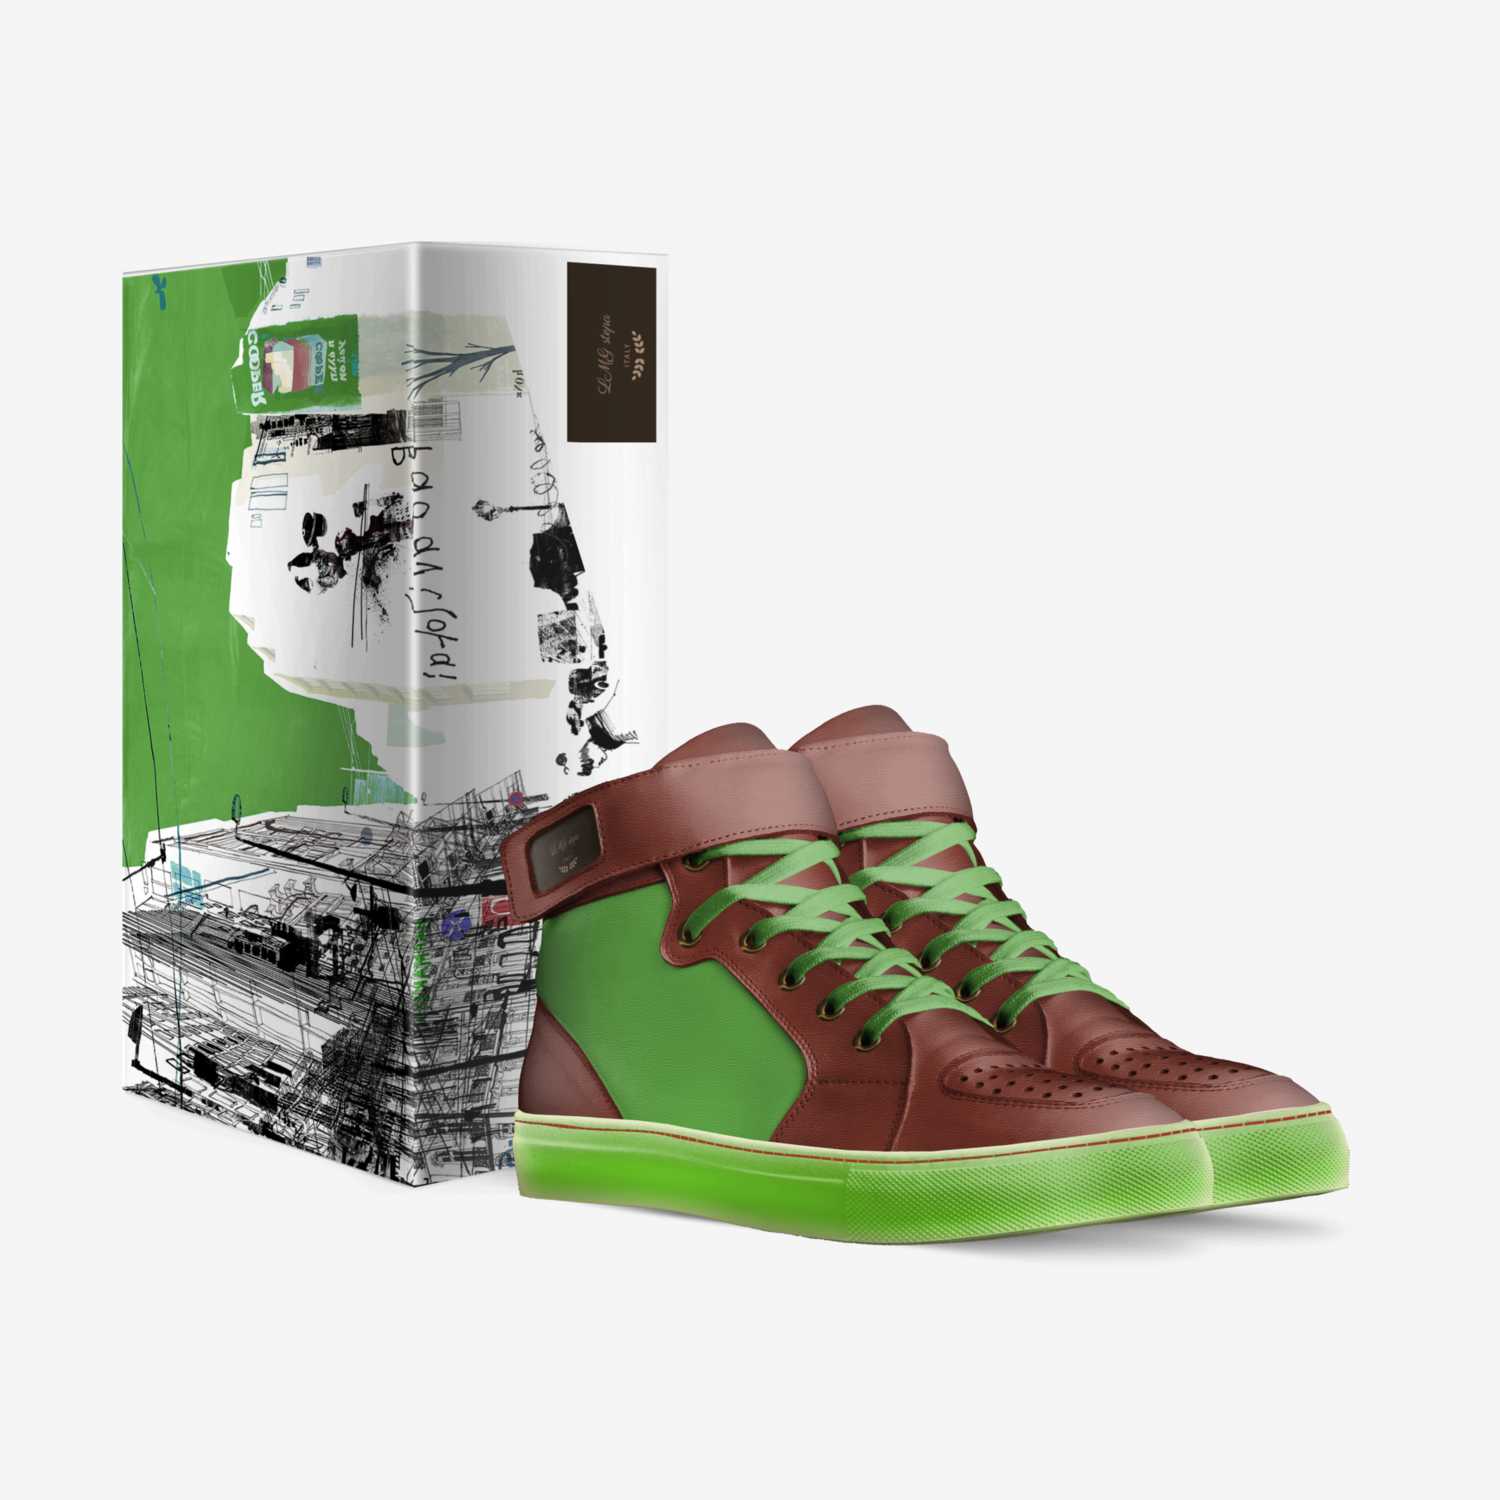 LMG stepa custom made in Italy shoes by Lutz Montgomery | Box view